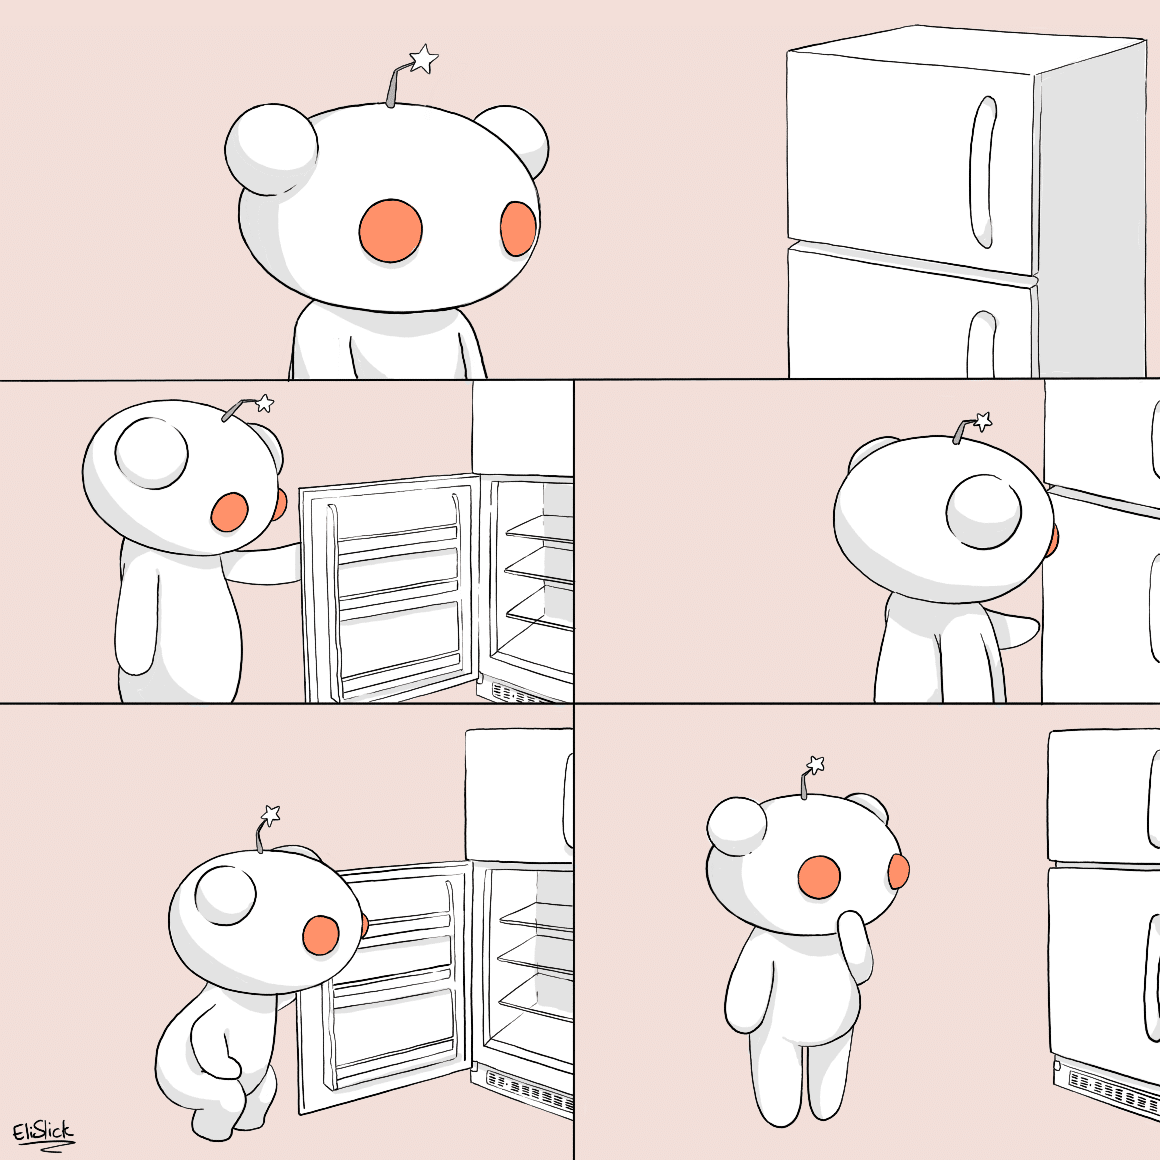  maybe food will appear if i keep checking(from elislick), Reddit, OC Comics  maybe food will appear if i keep checking(from elislick), Reddit, OC text: 